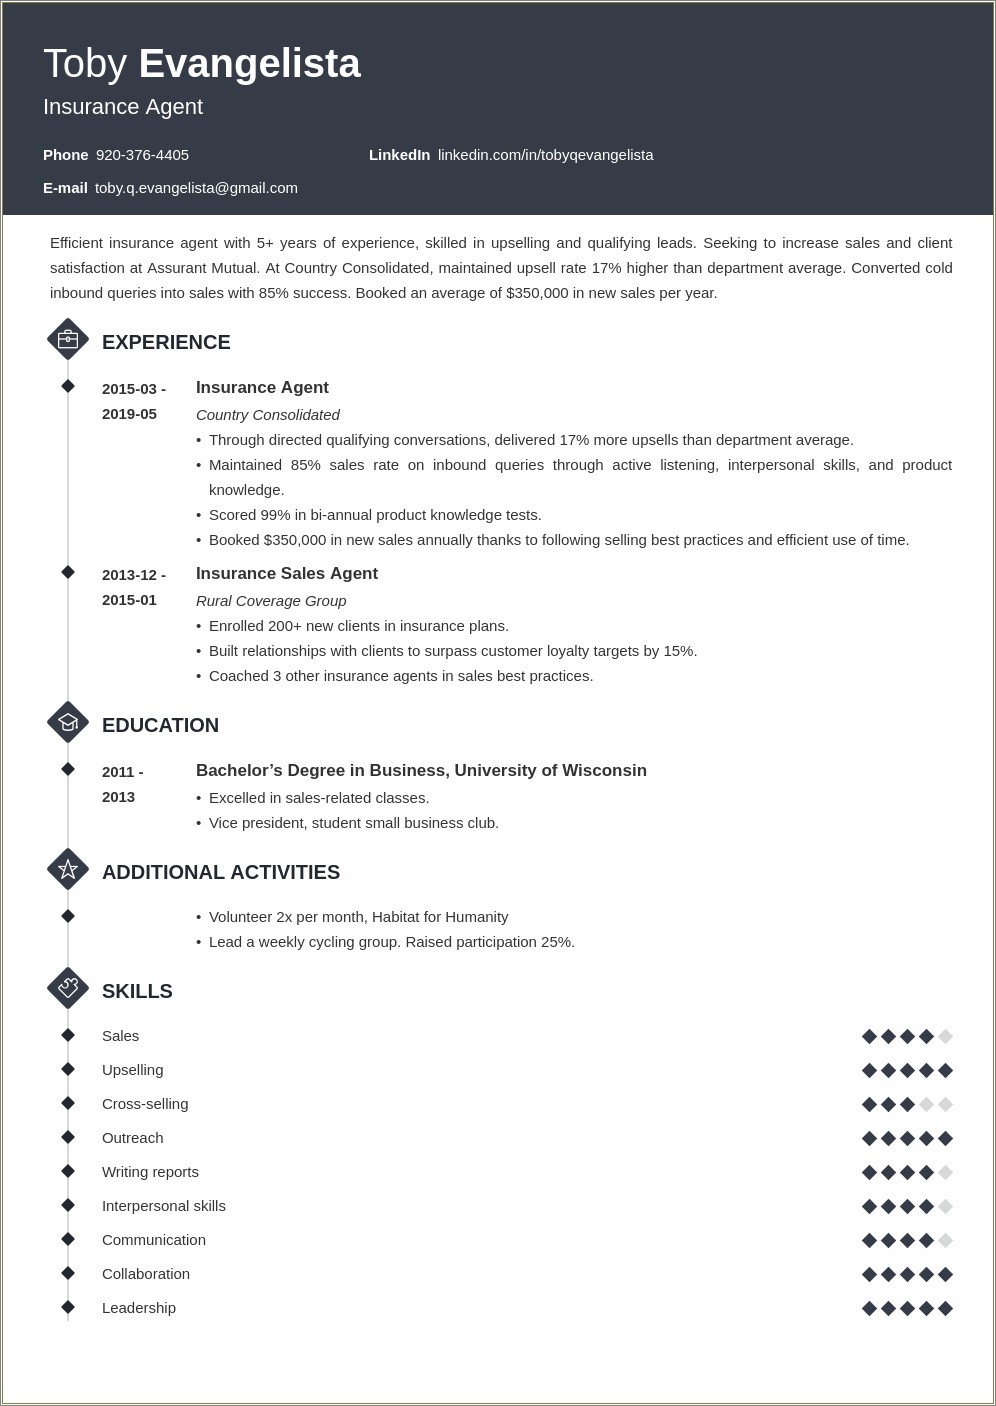 Resume Sample Of An Administrative Insurance Agent